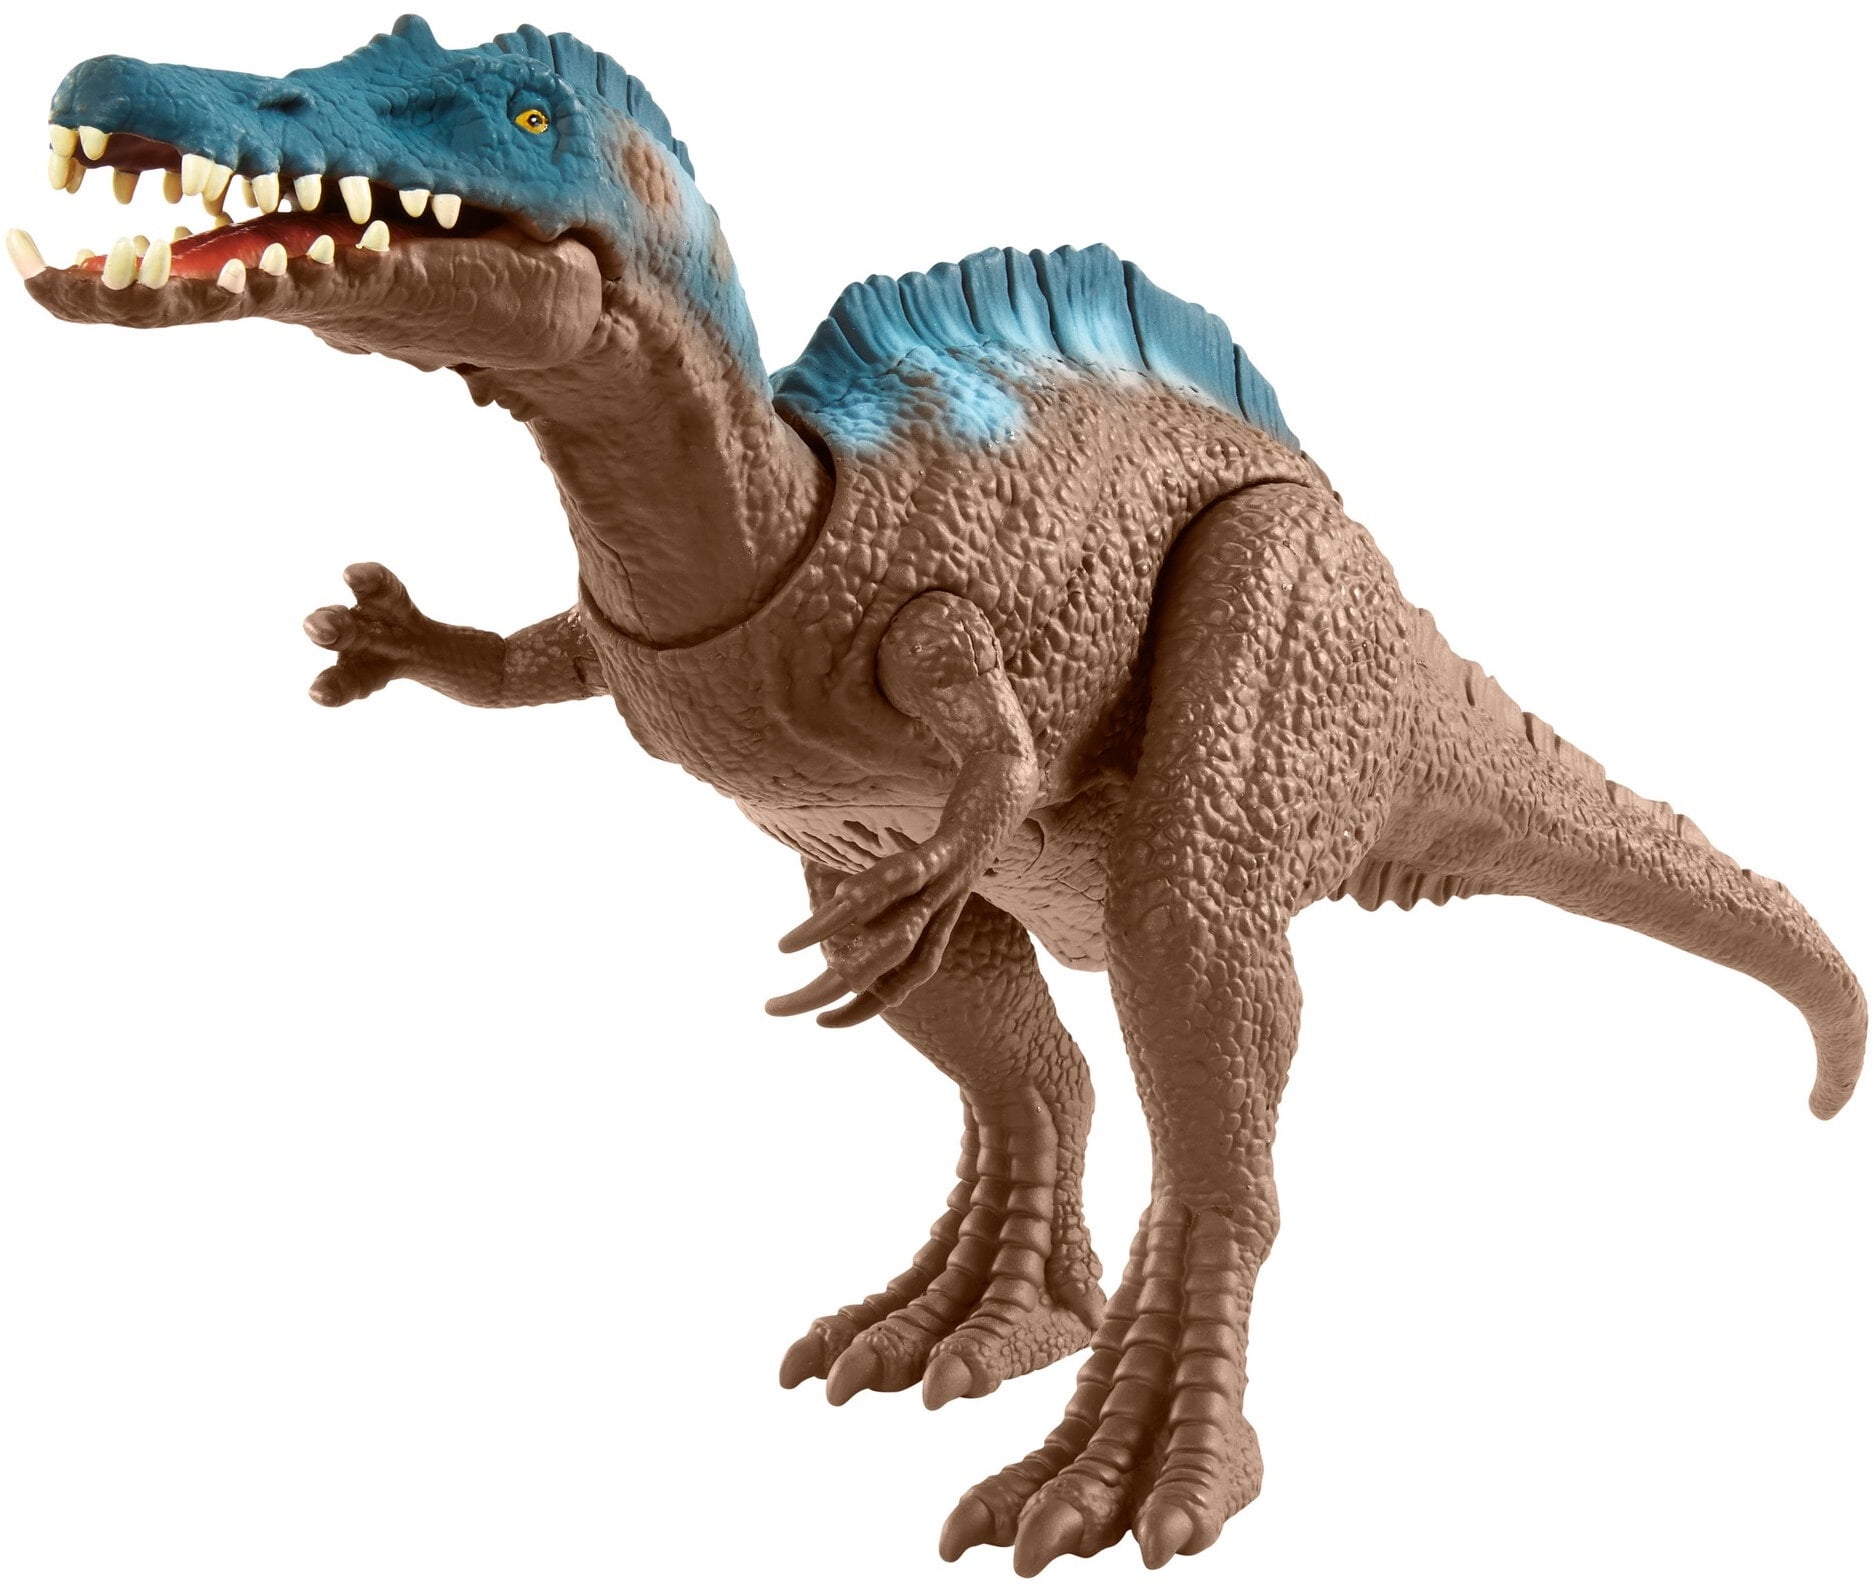 3D WITH PROJECTOR IMITATION SOUND AND LIGHT WORLD DINOSAUR TOY GIFT UK SELLER 